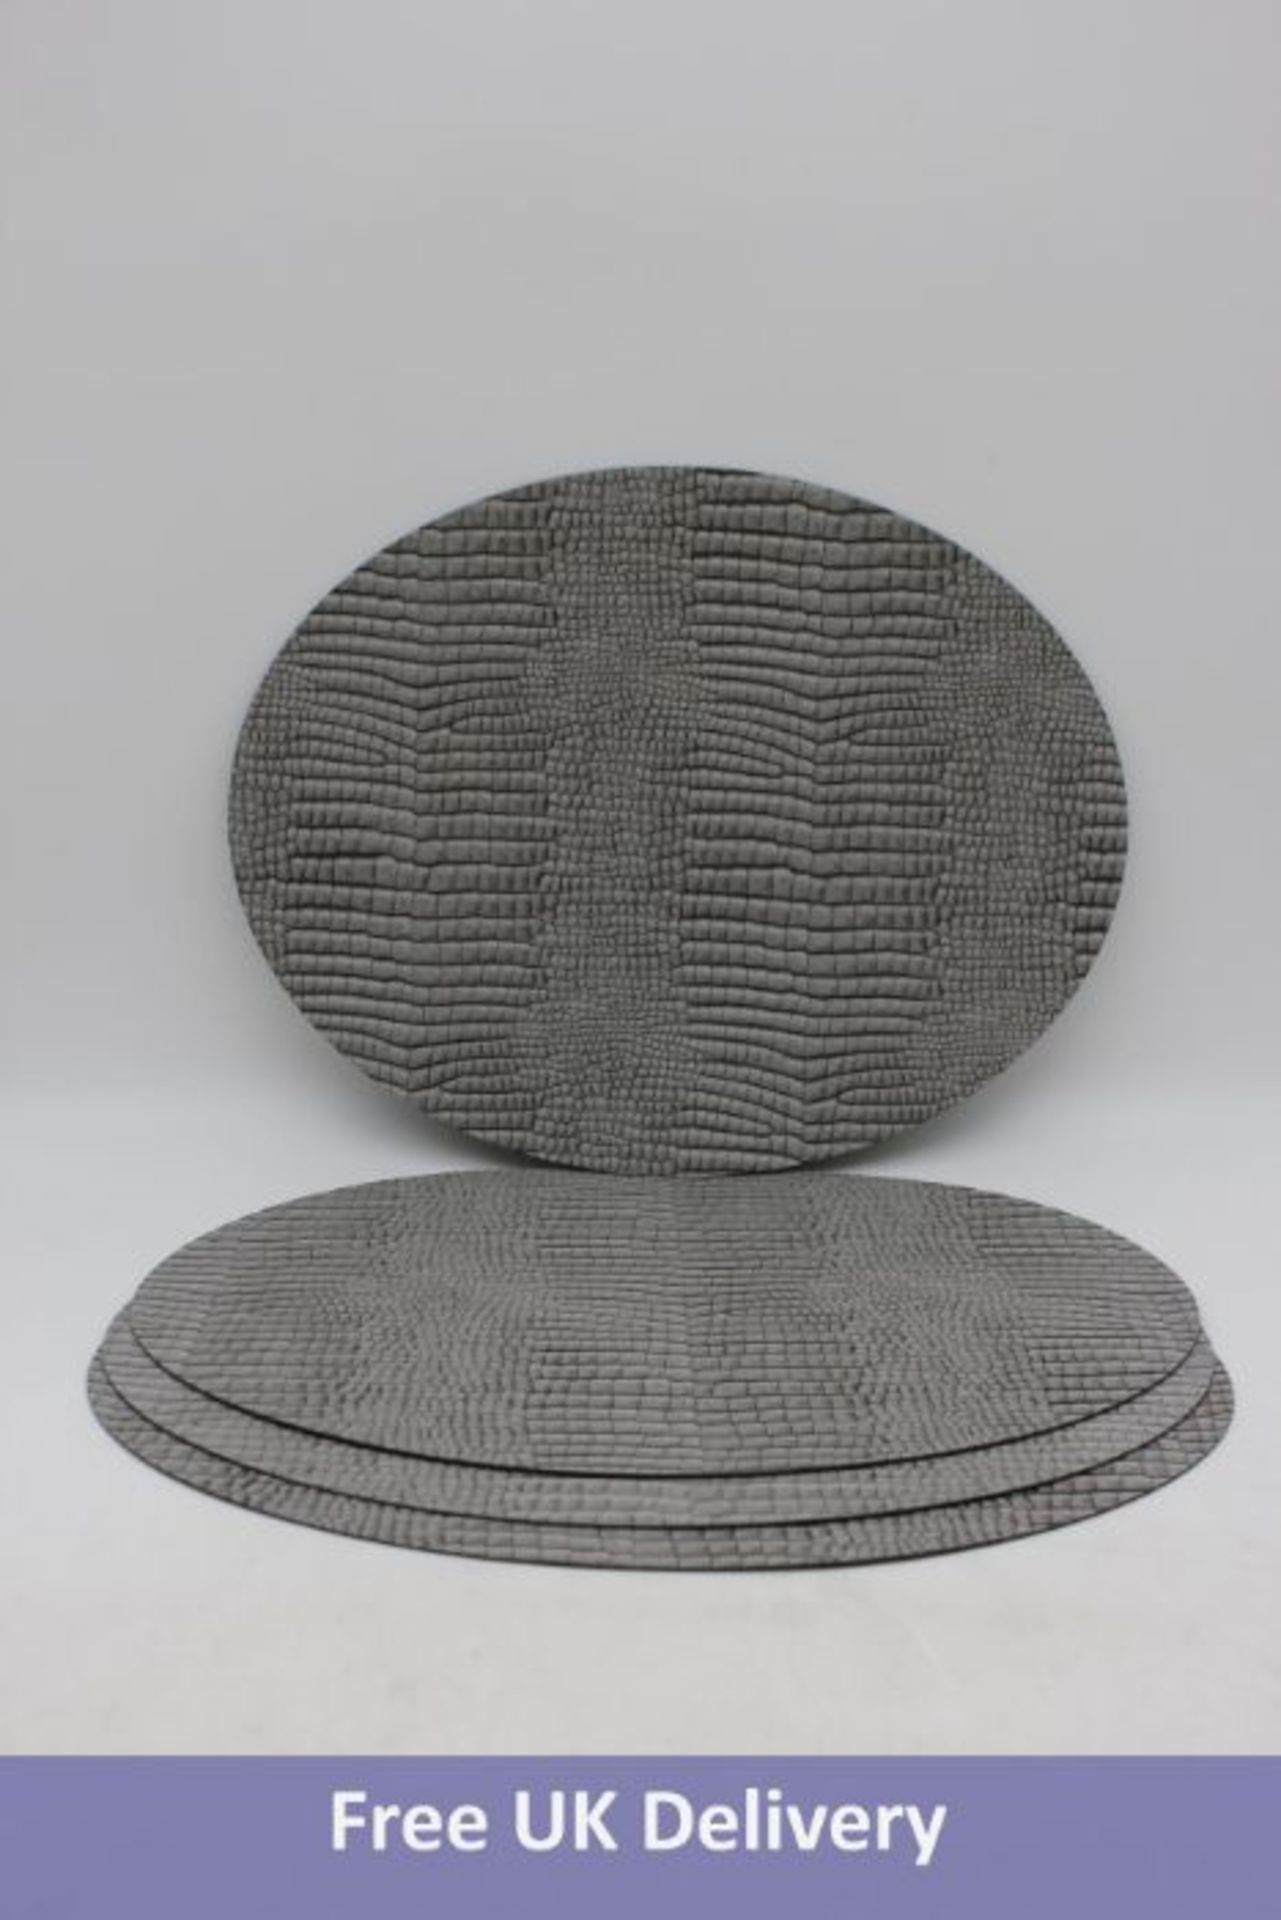 Twenty Lind DNA Oval Table Mats, CROCO Silver-Black Leather, 35 x 46 cm - Image 4 of 5